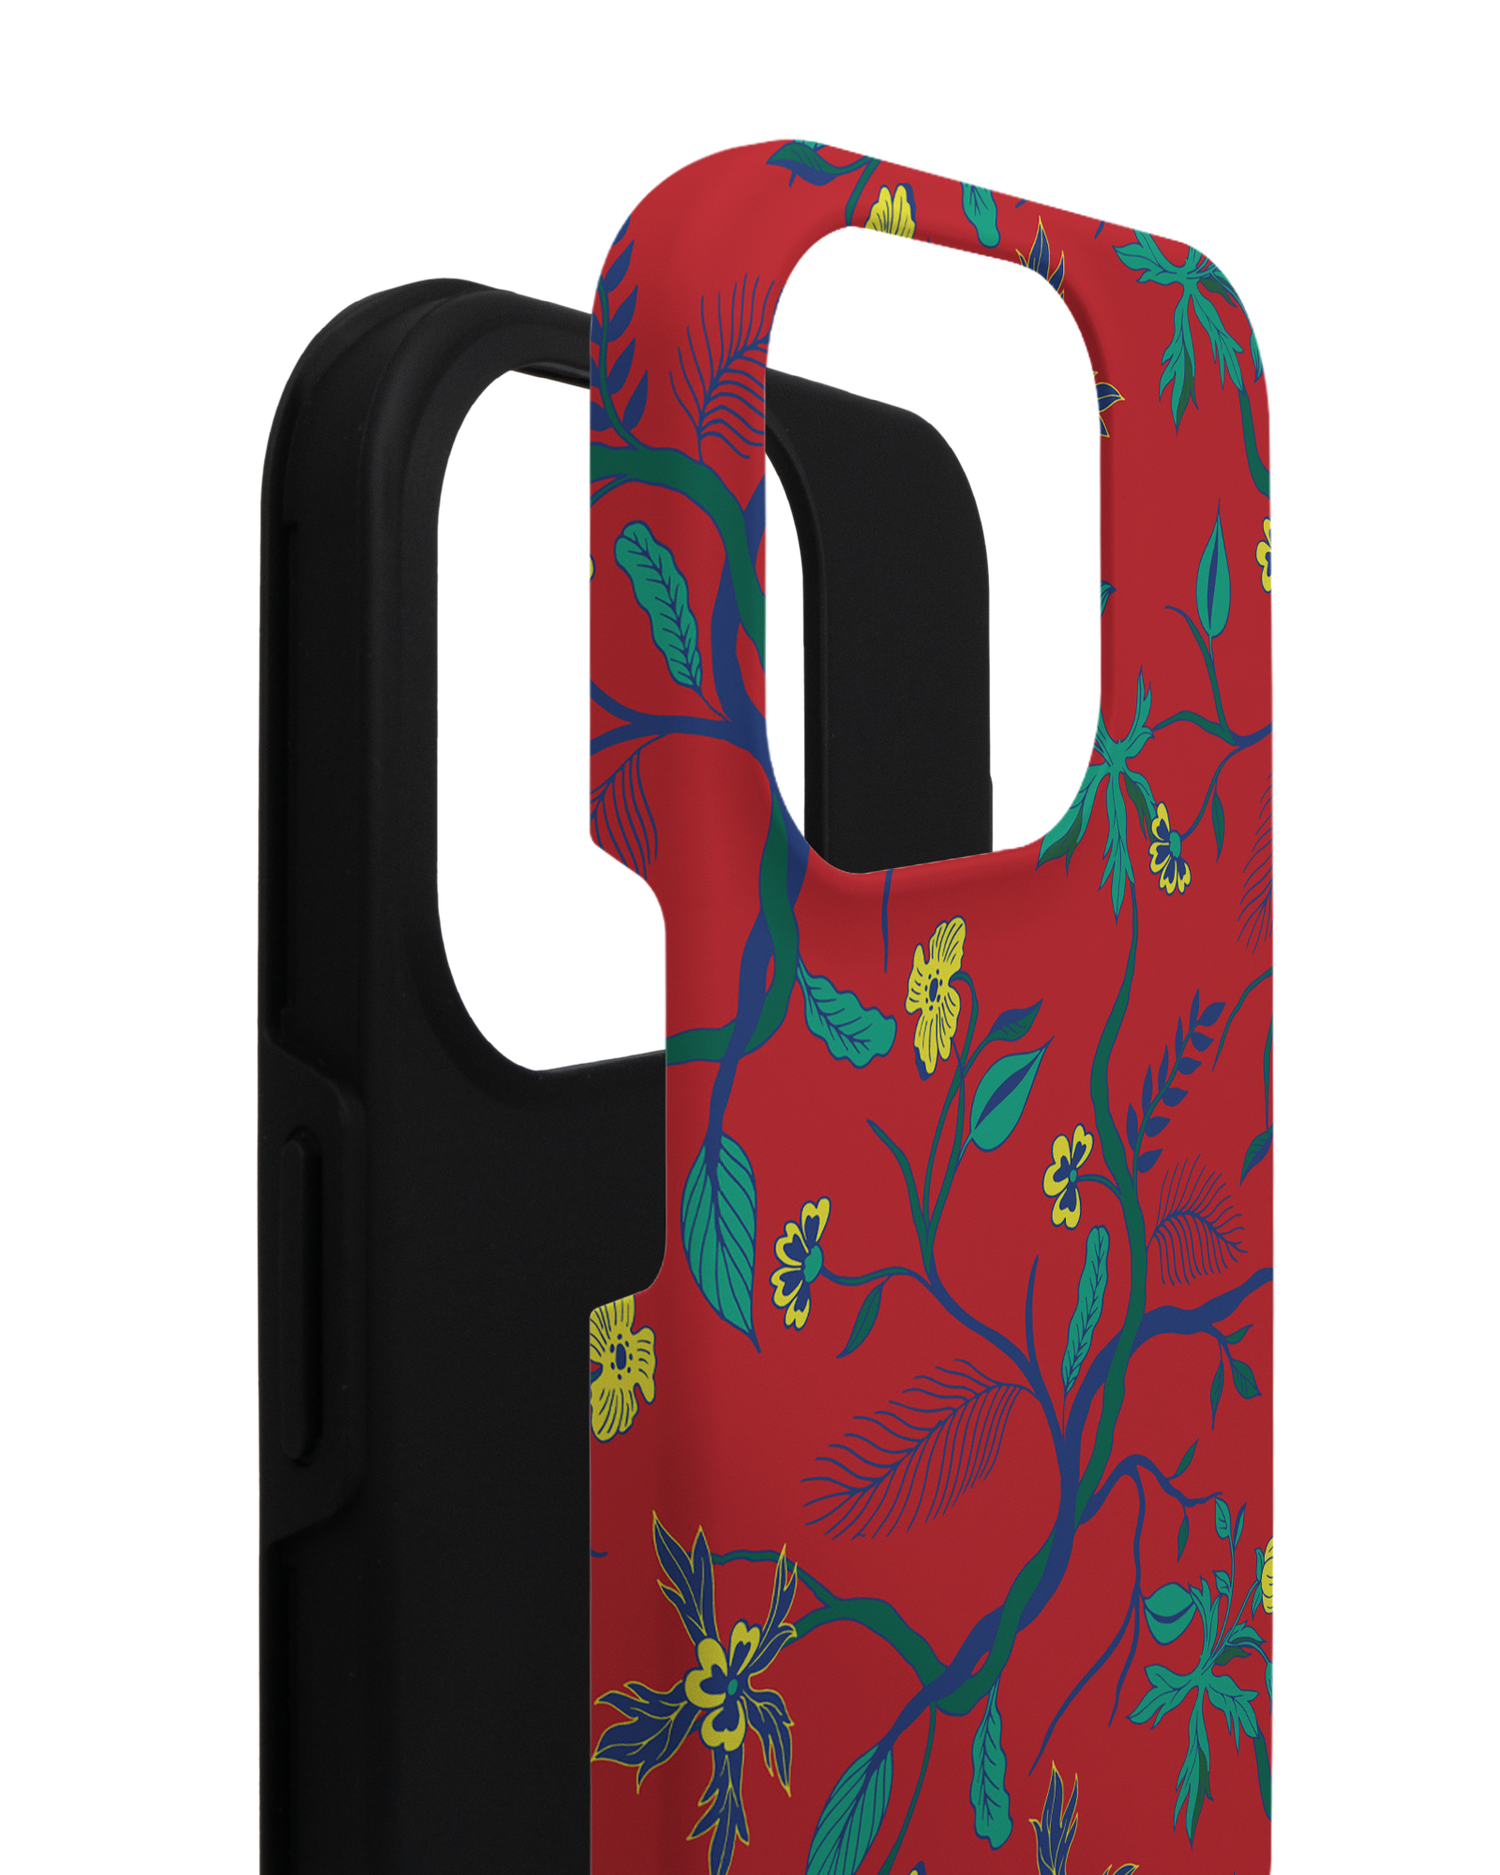 Ultra Red Floral Premium Phone Case for Apple iPhone 14 Pro consisting of 2 parts